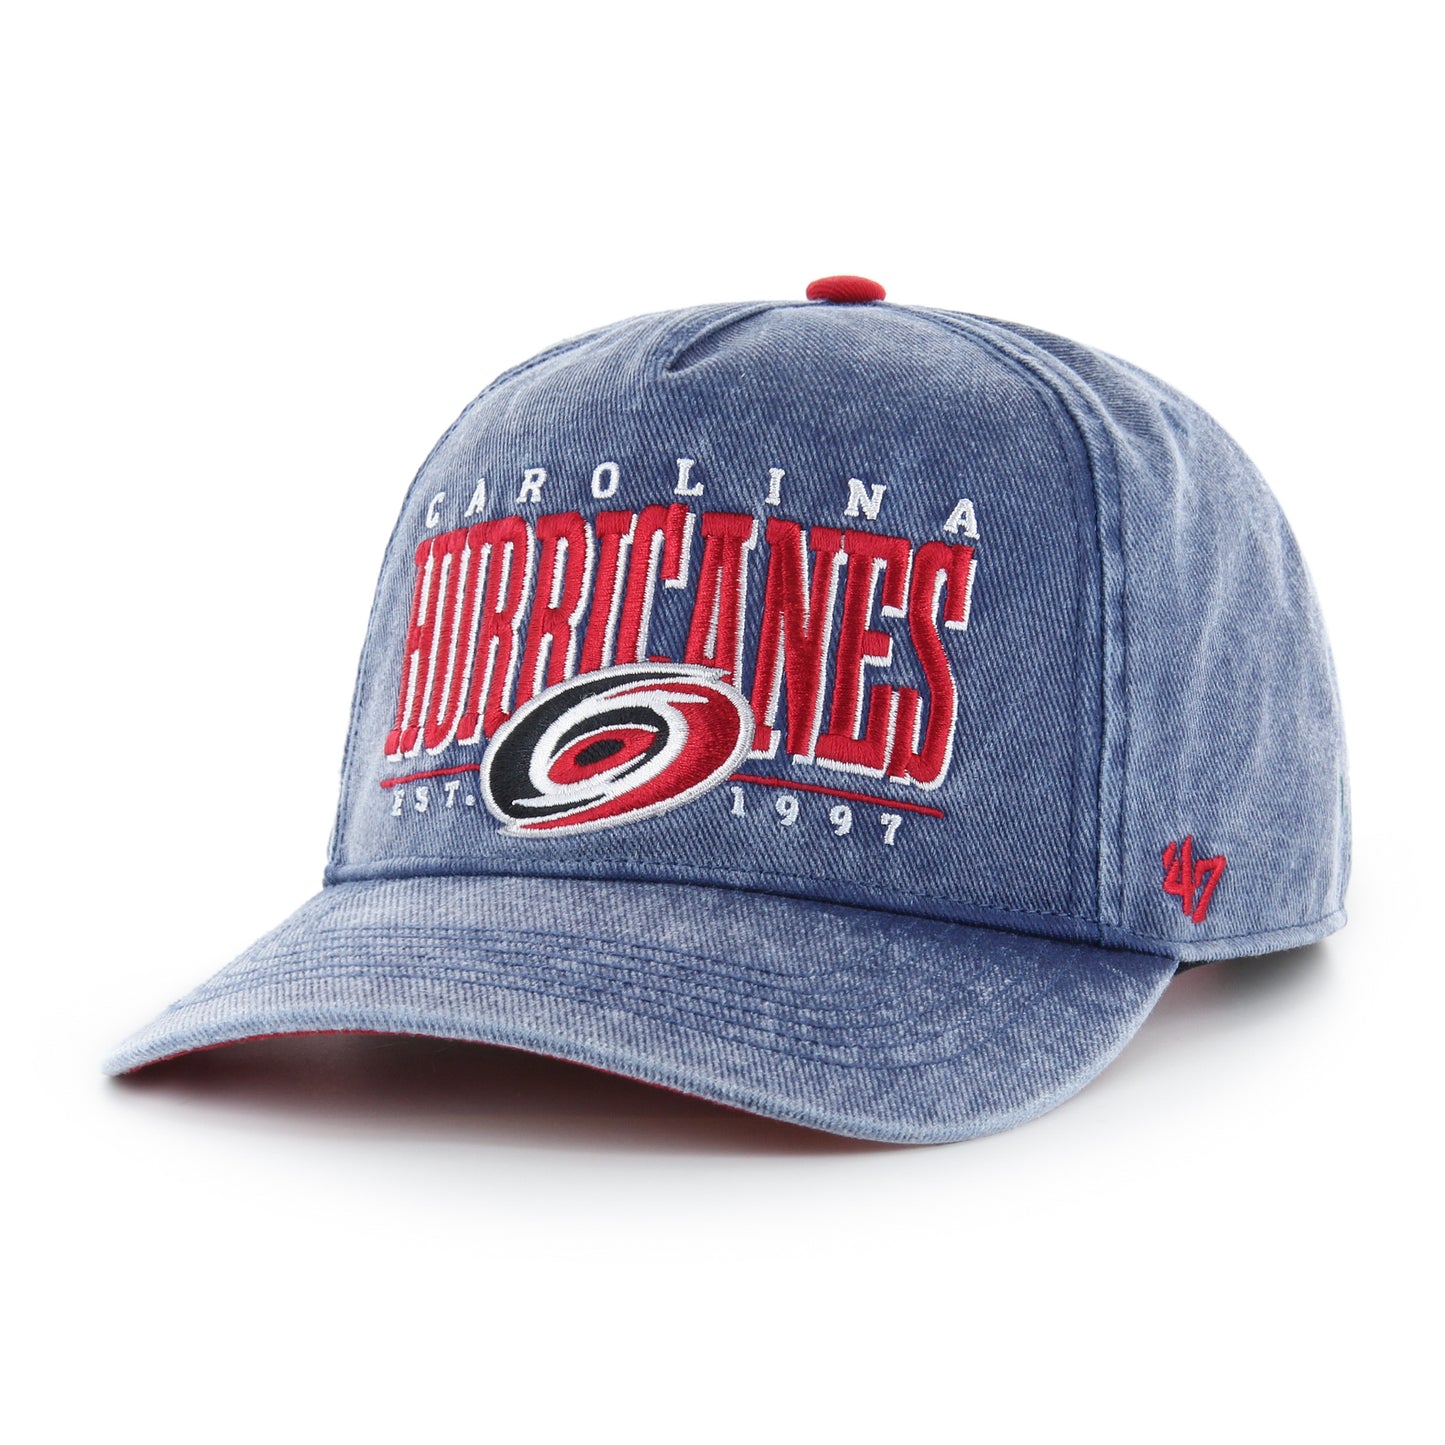 Front: Blue jean hat with red and white Carolina Hurricanes Est. 1997 graphic with Hurricanes logo 